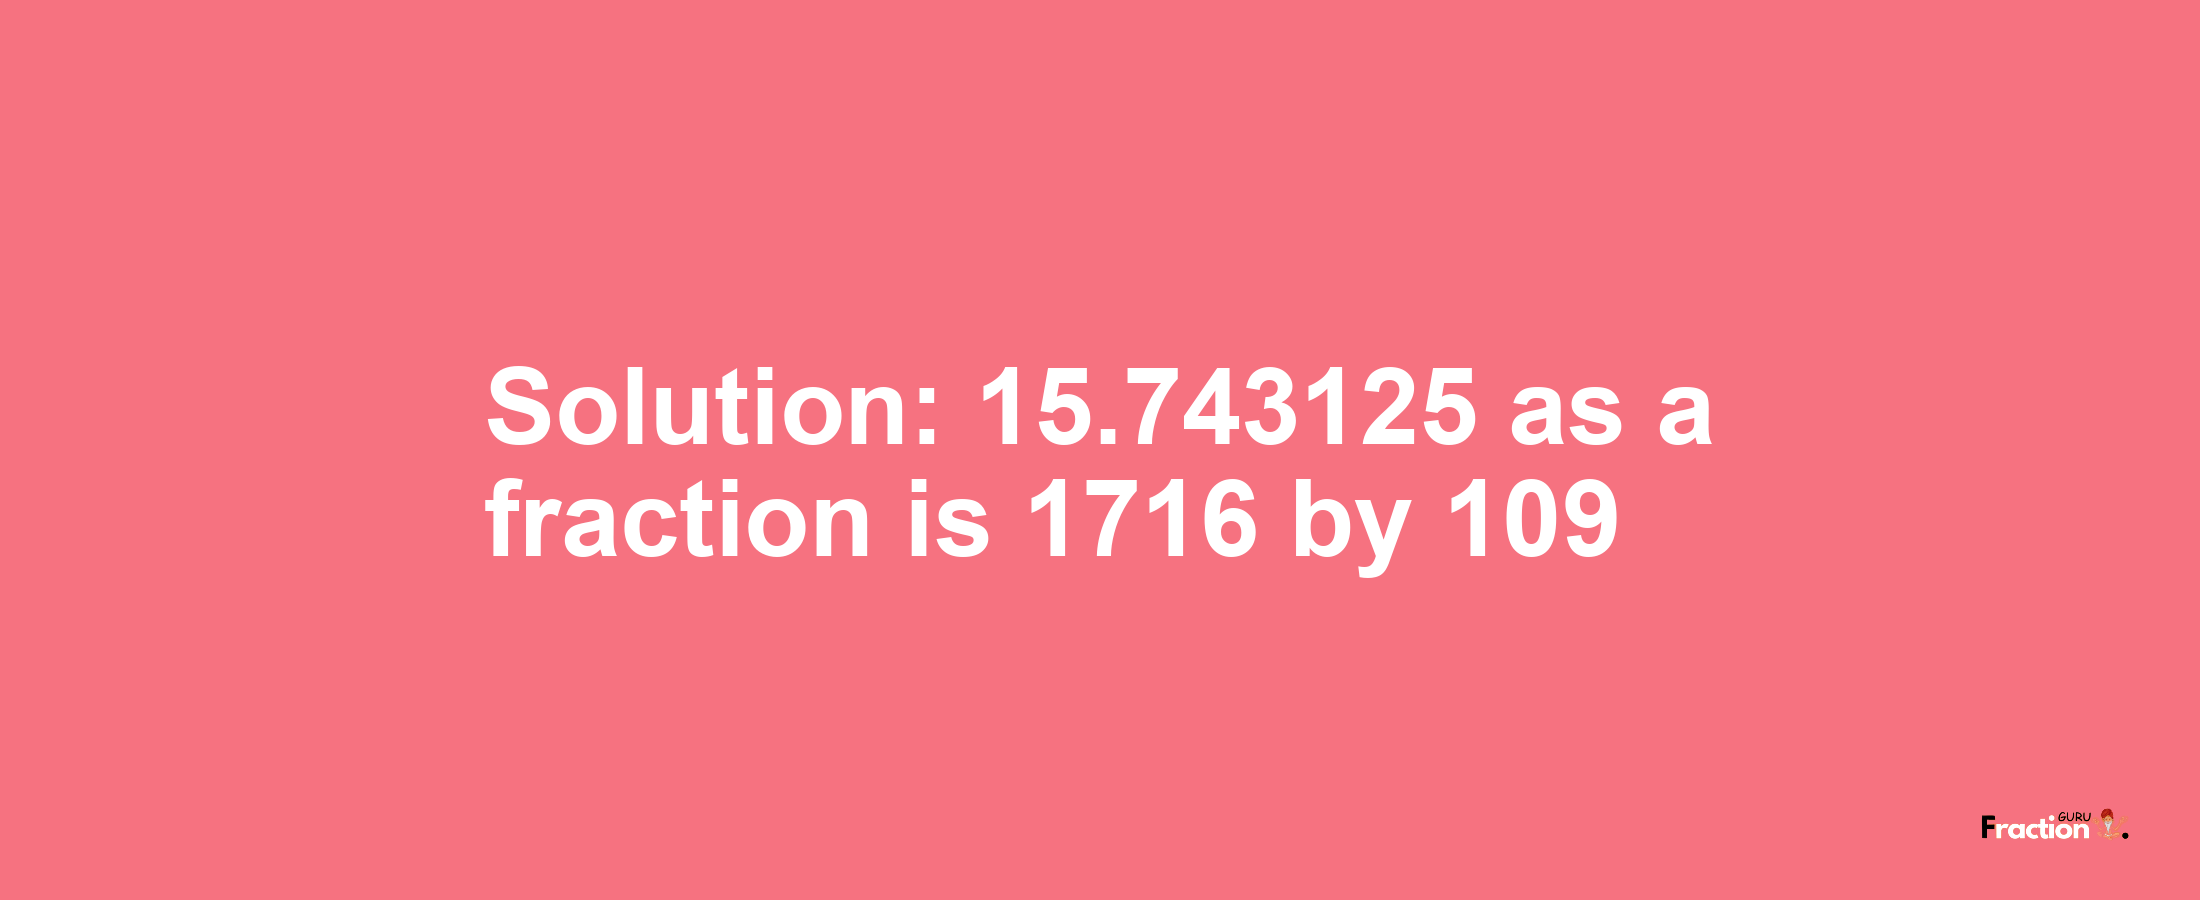 Solution:15.743125 as a fraction is 1716/109